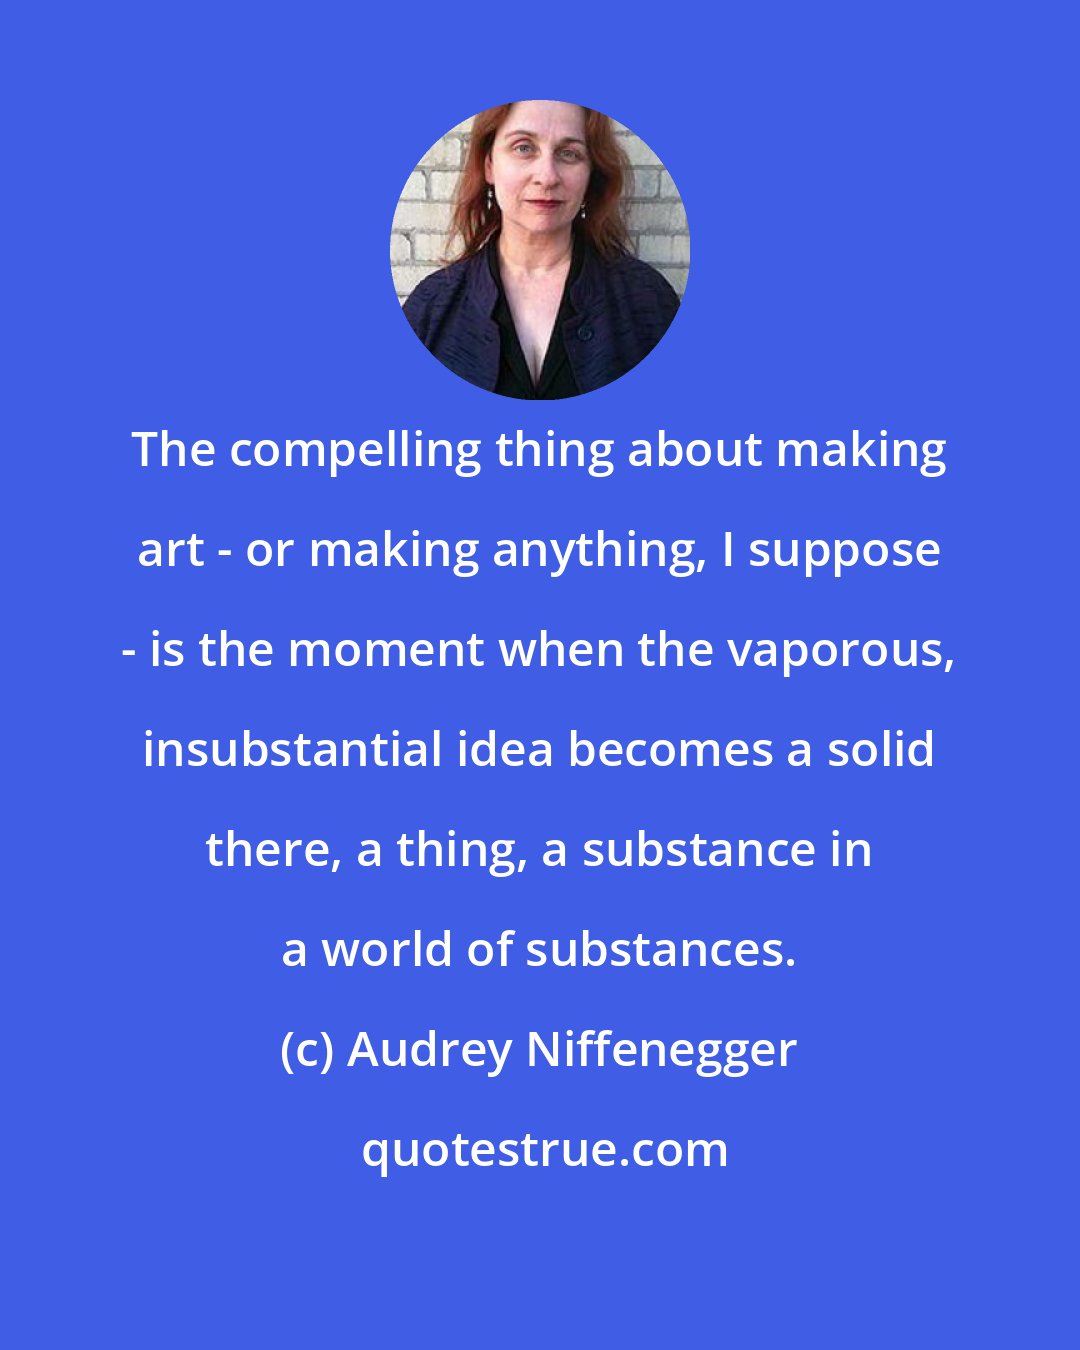 Audrey Niffenegger: The compelling thing about making art - or making anything, I suppose - is the moment when the vaporous, insubstantial idea becomes a solid there, a thing, a substance in a world of substances.